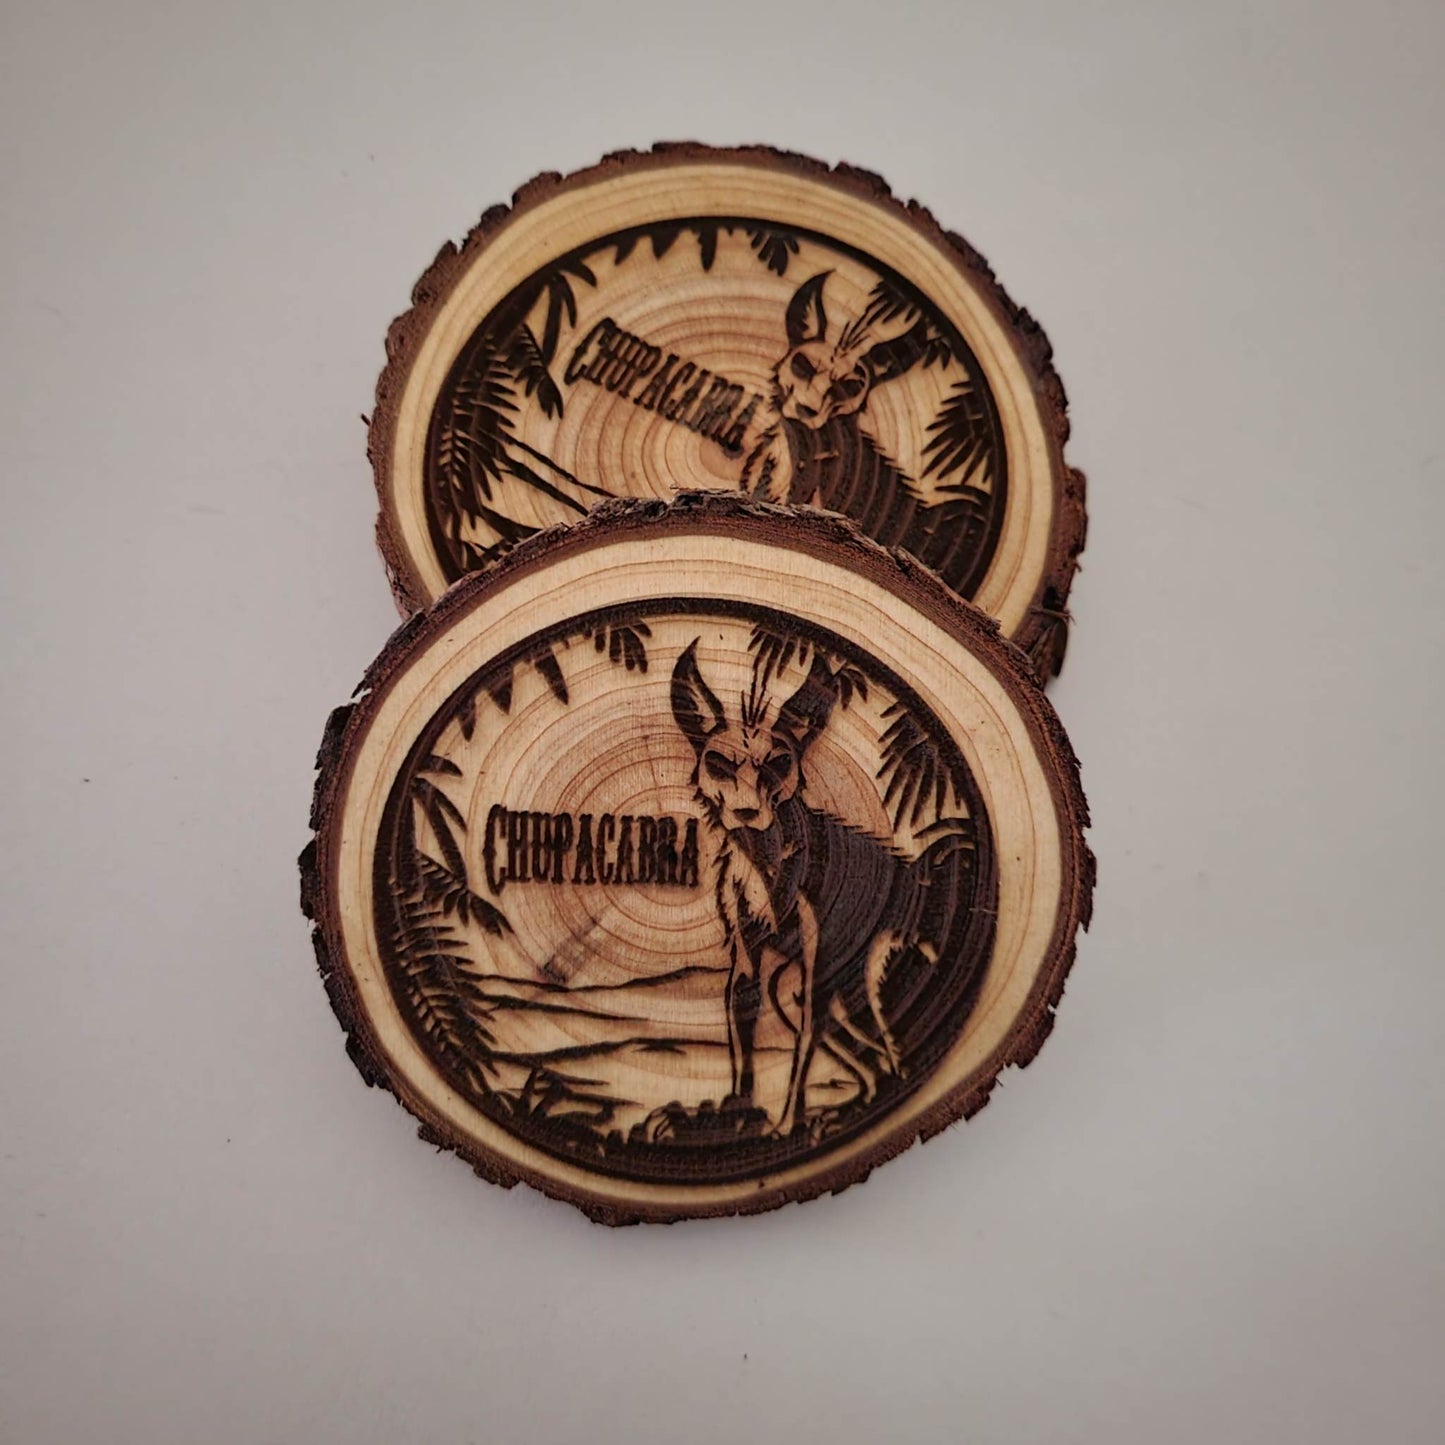 Chupacabra Laser Engraved Pine Drink Coasters: Folklore-Inspired Rustic Charm